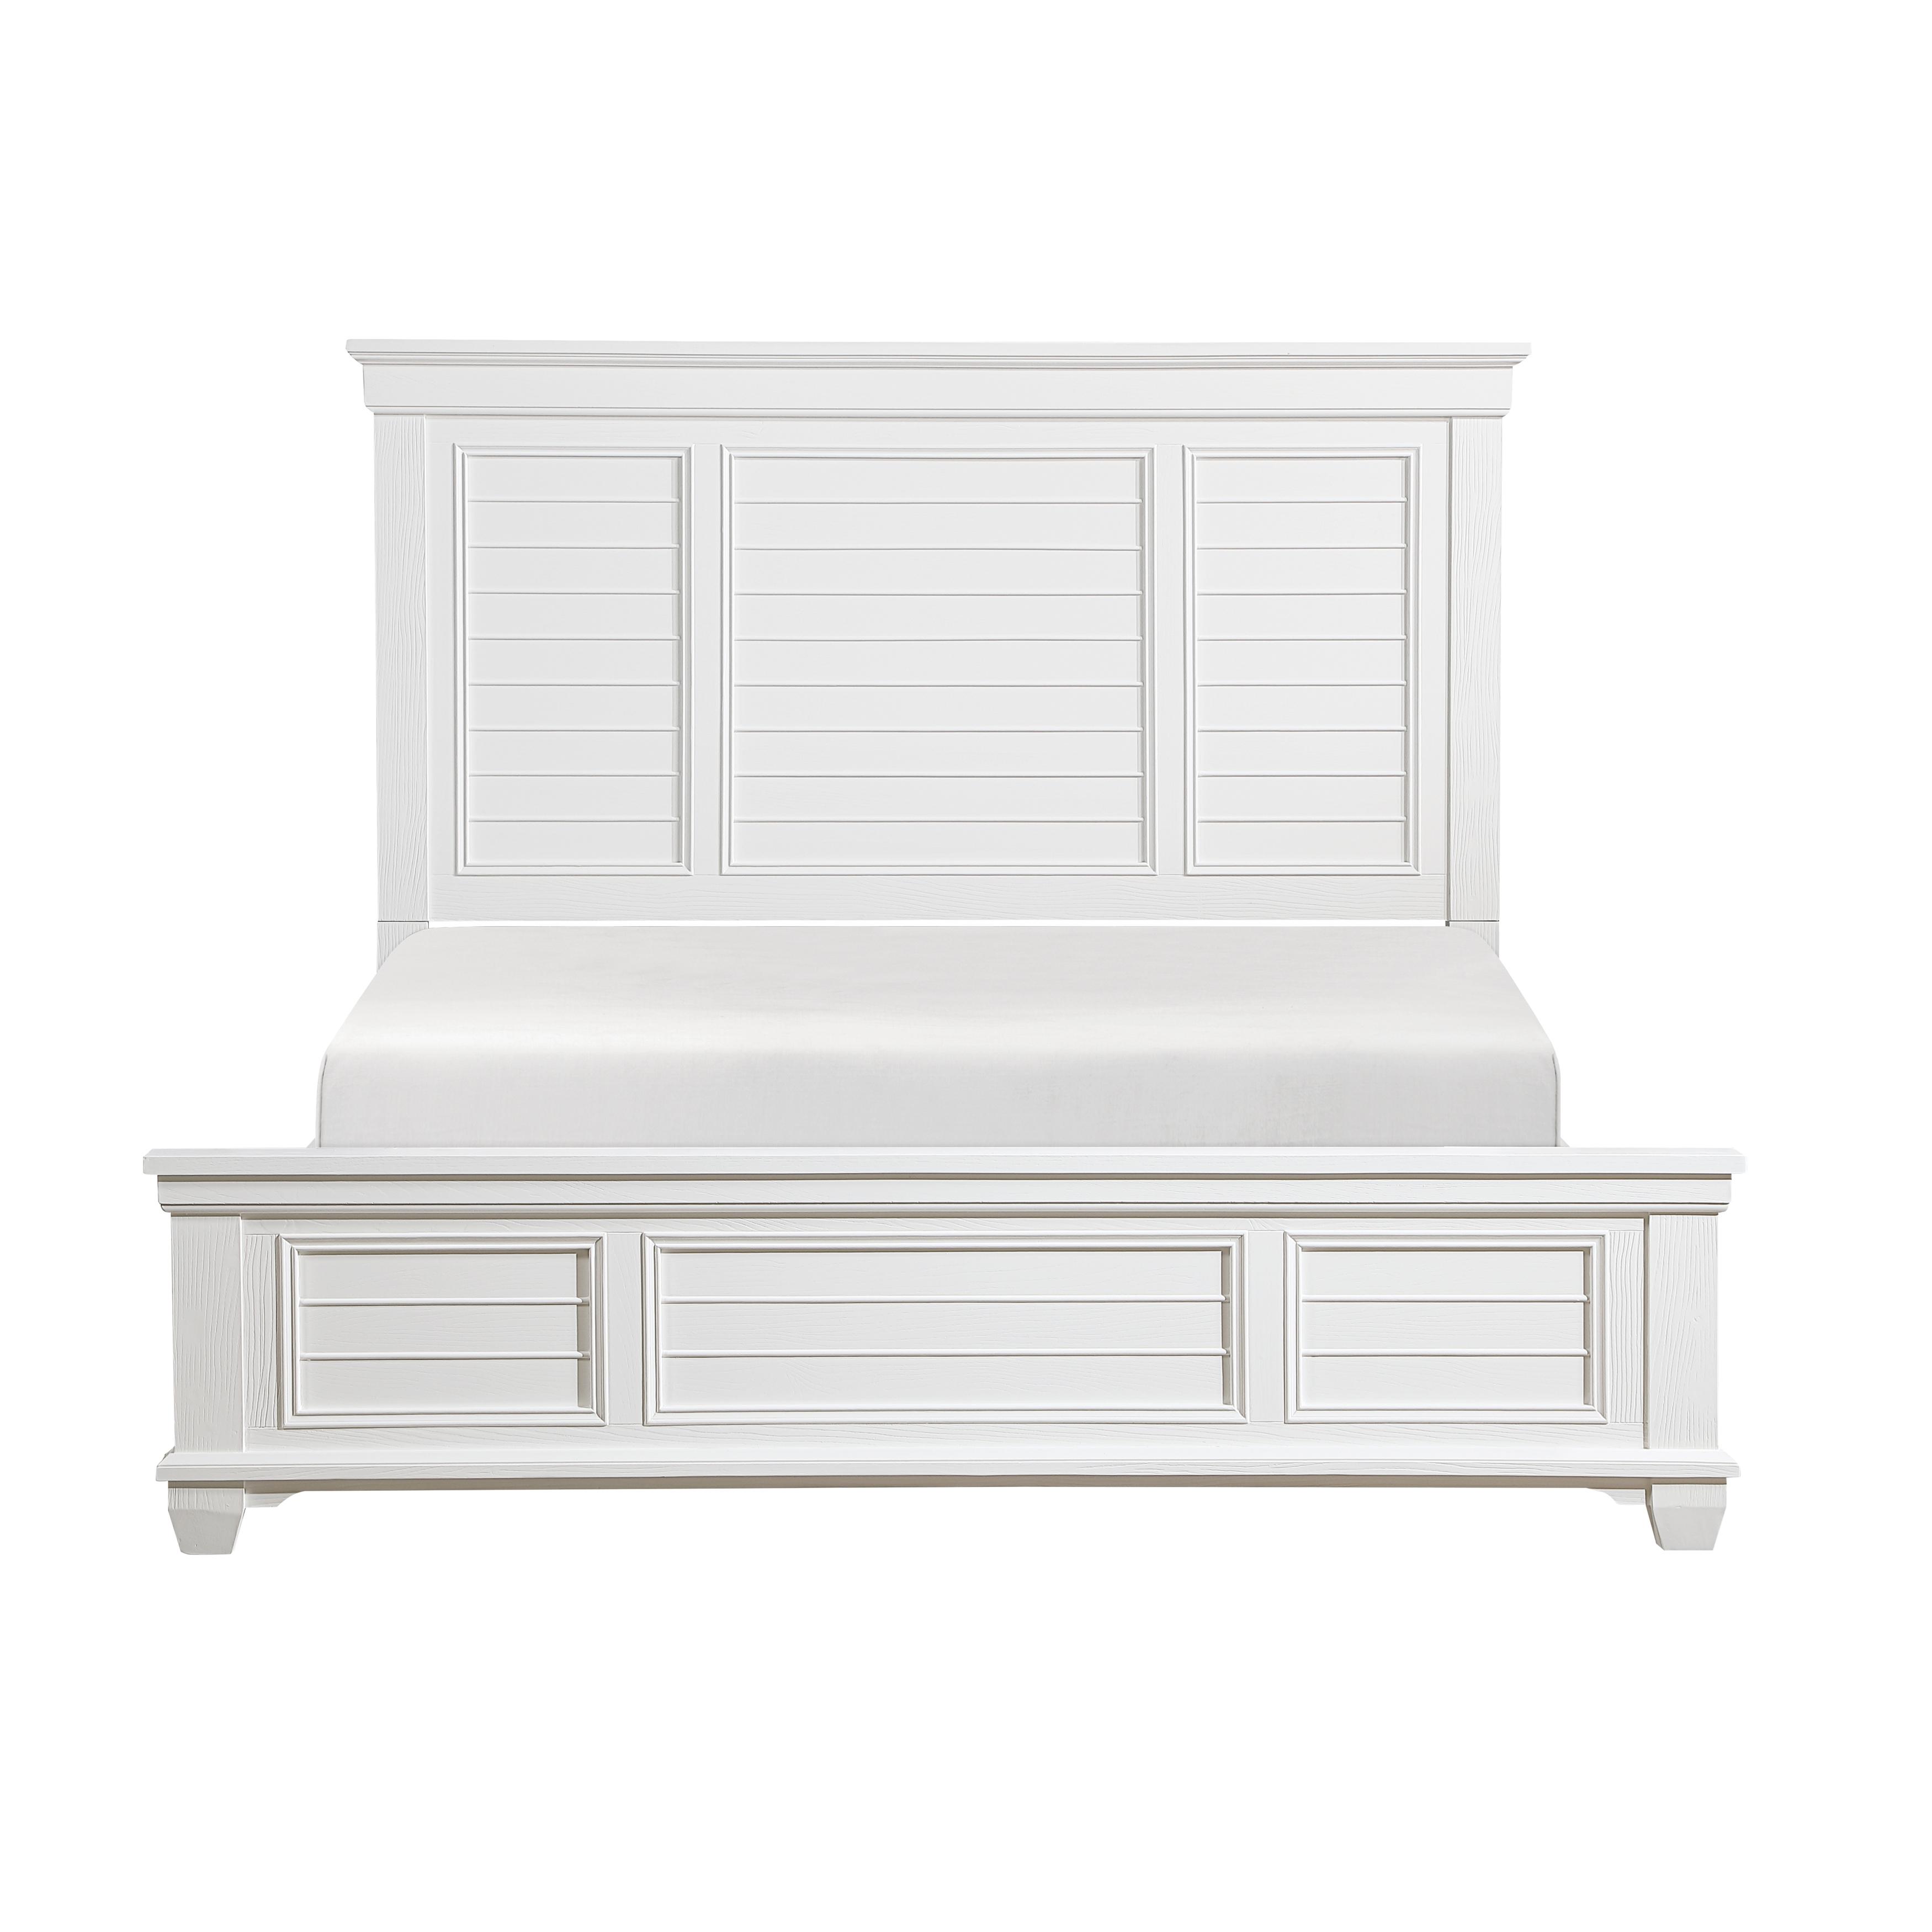 Traditional Panel Bed Mackinac Collection California King Panel Bed 1454K-1CK-CK 1454K-1CK-CK in White Finish 